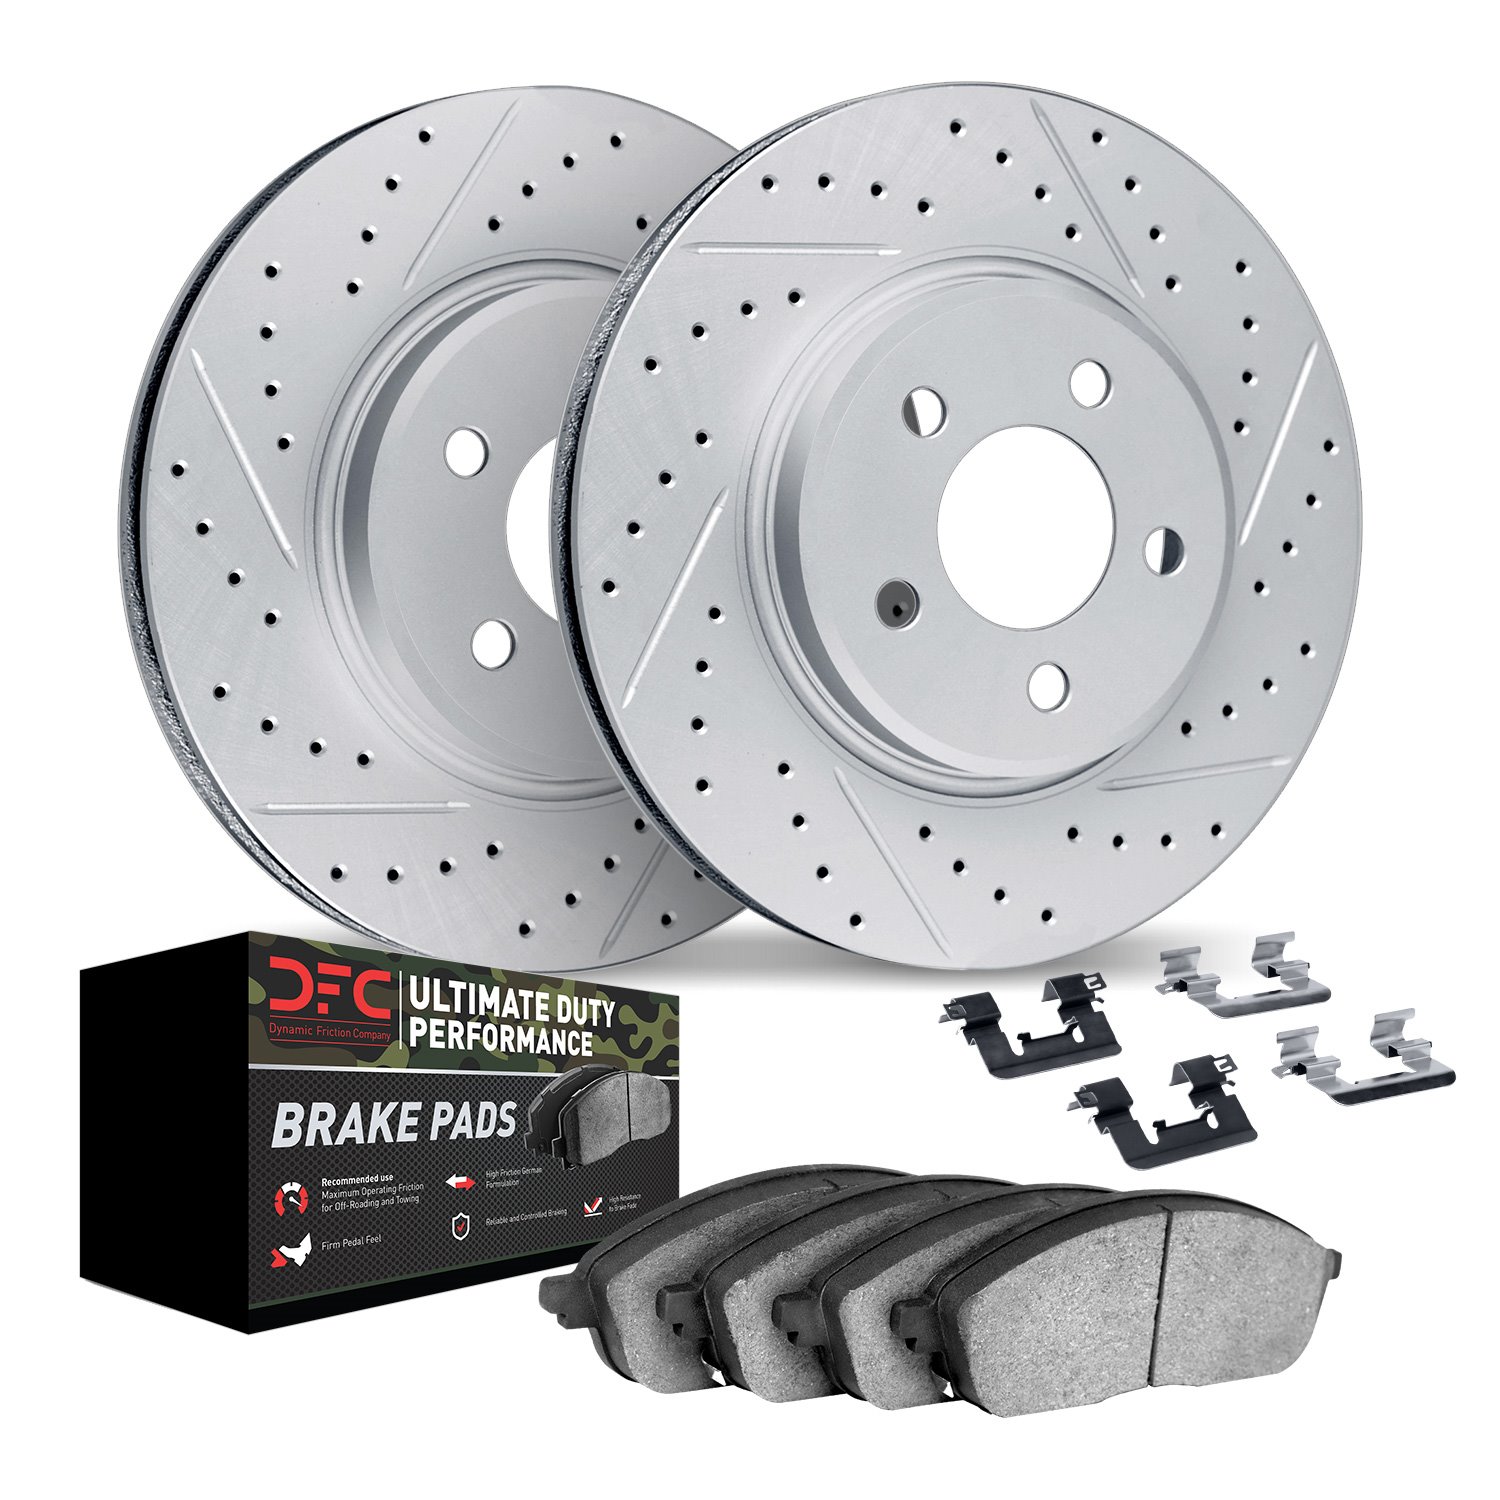 2412-54016 Geoperformance Drilled/Slotted Brake Rotors with Ultimate-Duty Brake Pads Kit & Hardware, 1997-1999 Ford/Lincoln/Merc